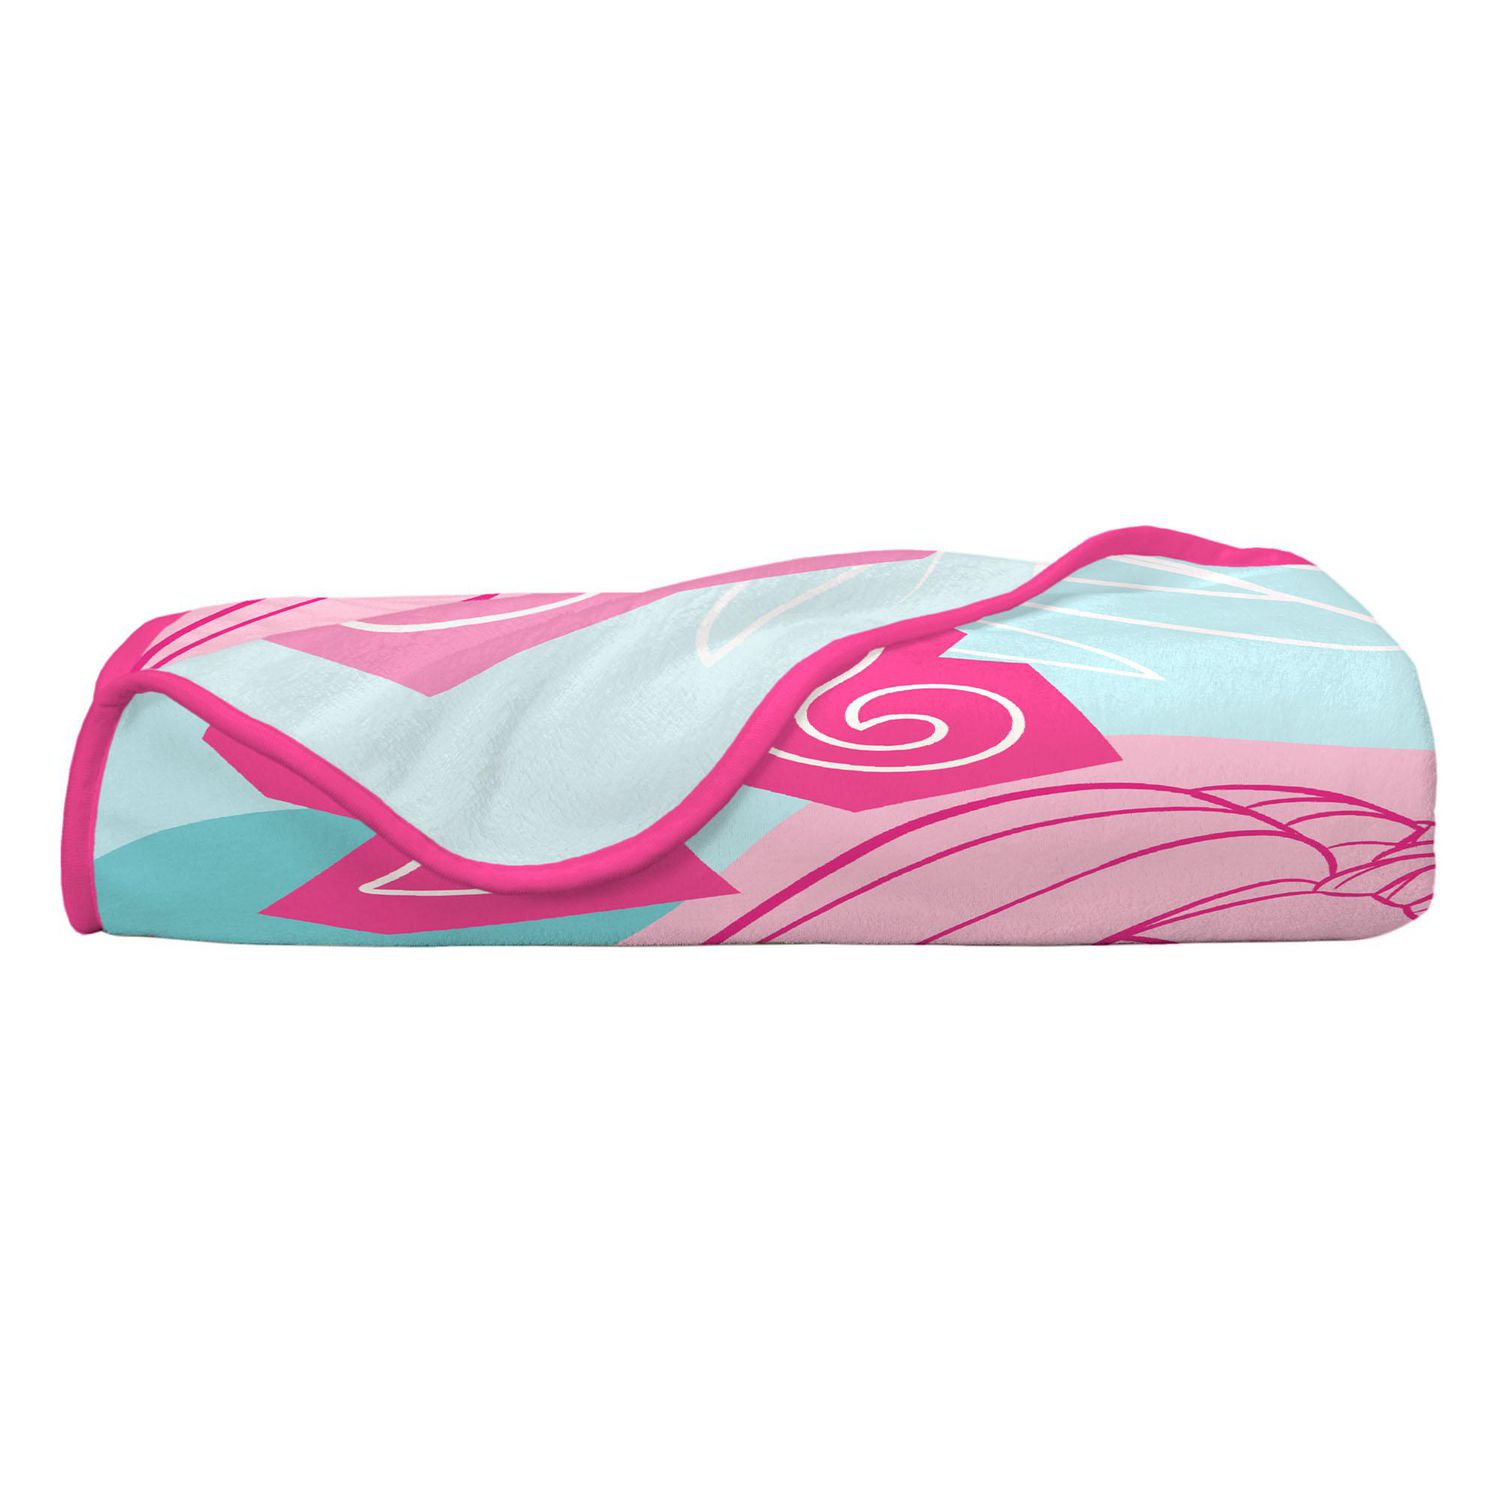 As You Are Fleece Blanket - Barbie - Spencer's